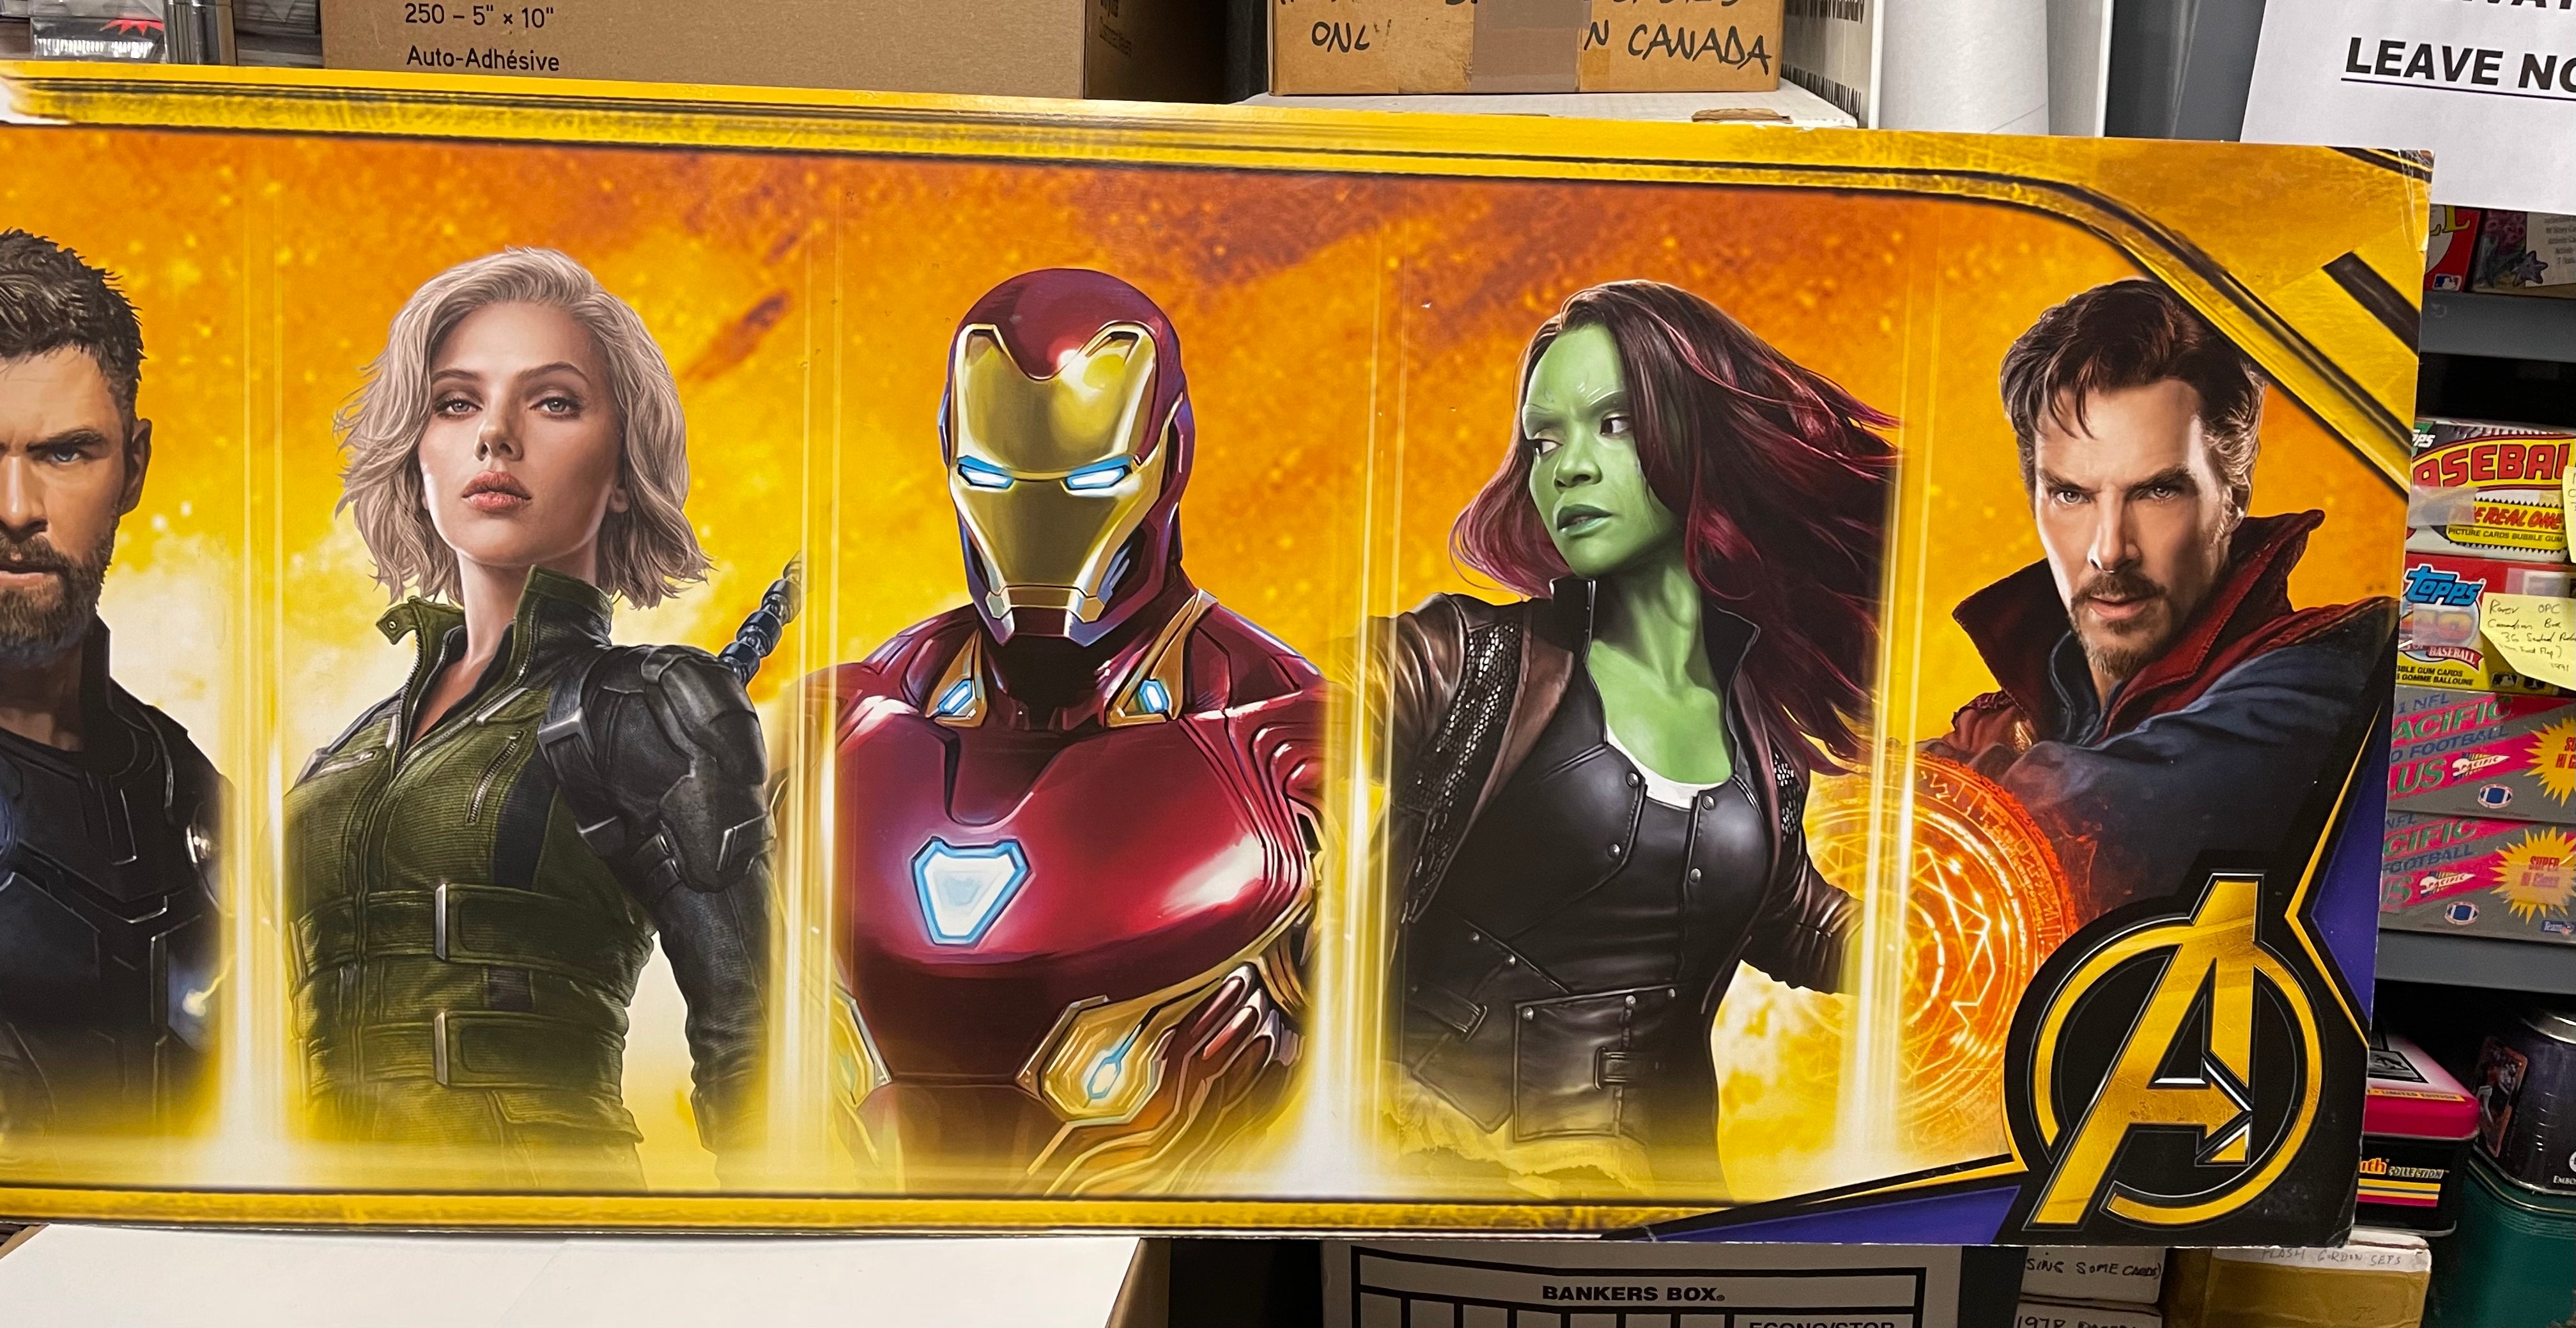 Marvel Avengers Infinity War movie special large 17x47 display cardboard poster